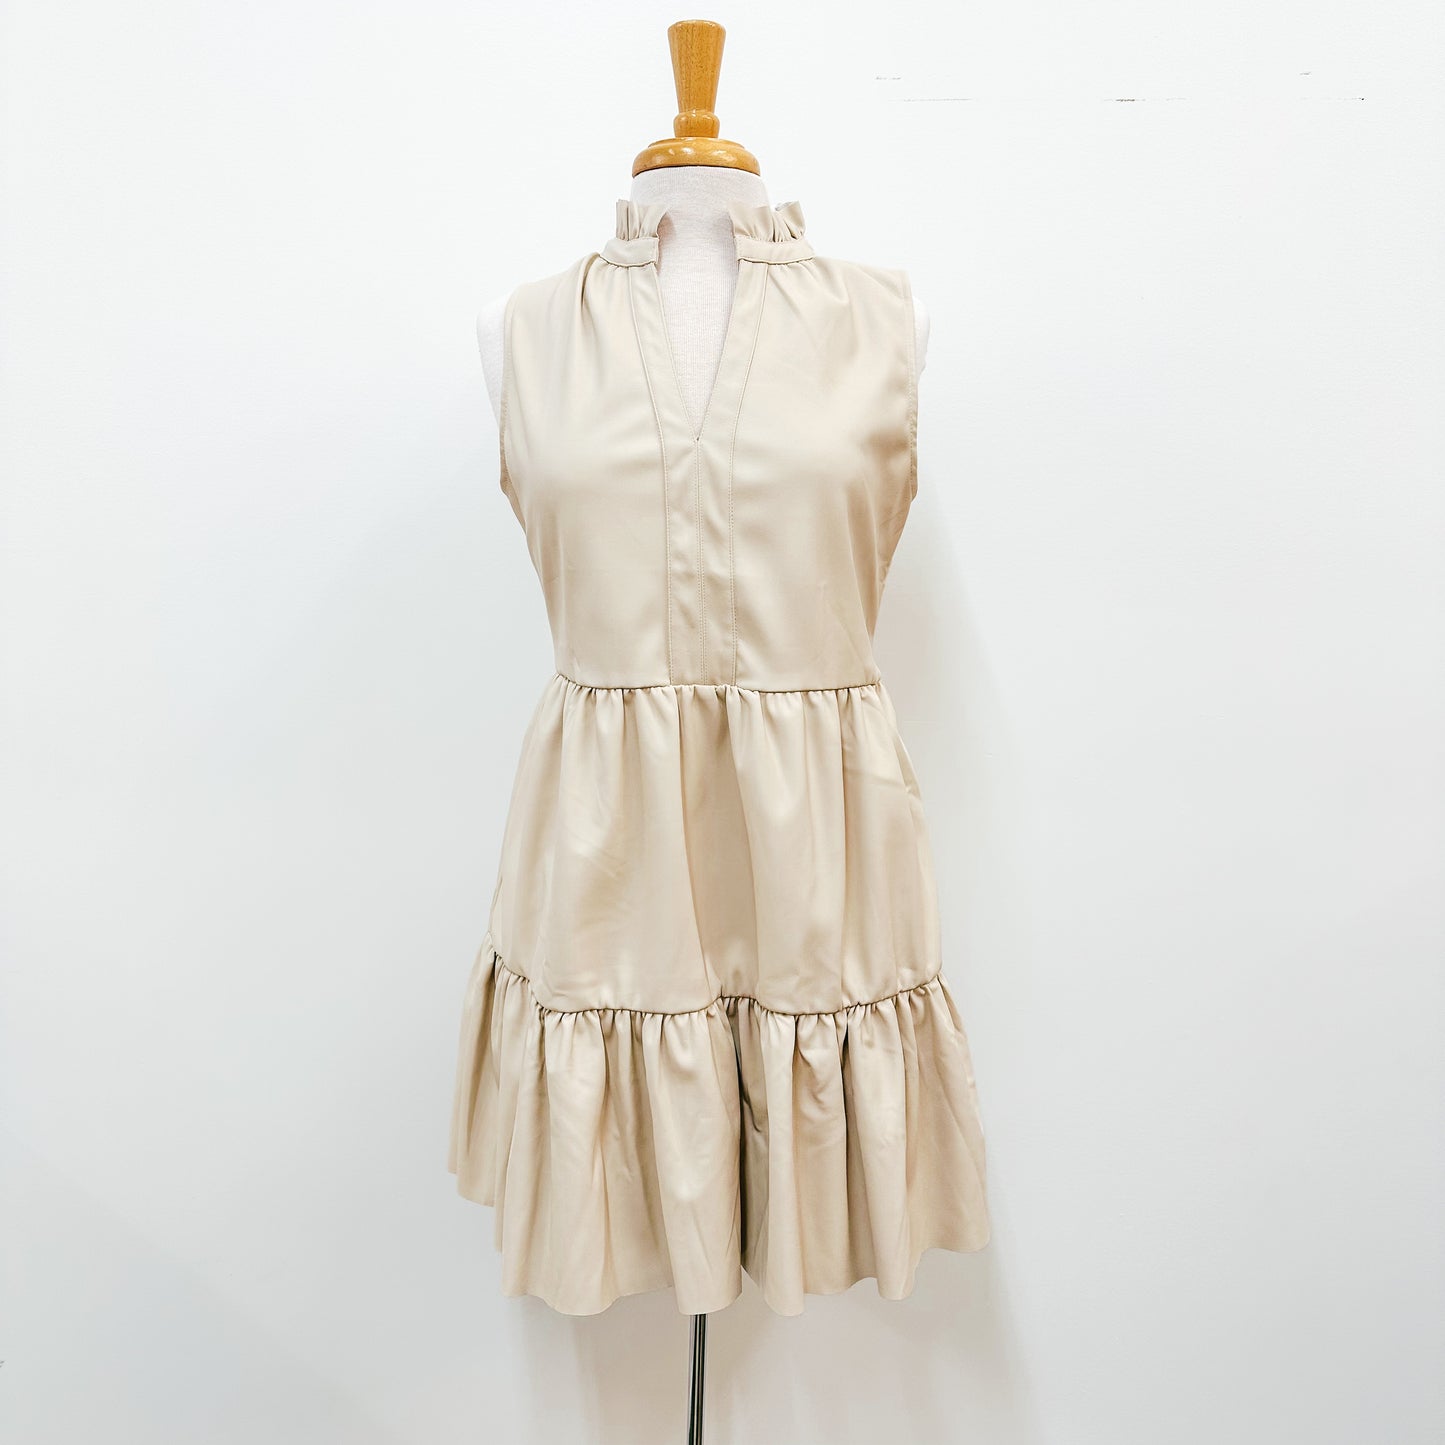 Cute Faux Leather Dress - Ivory